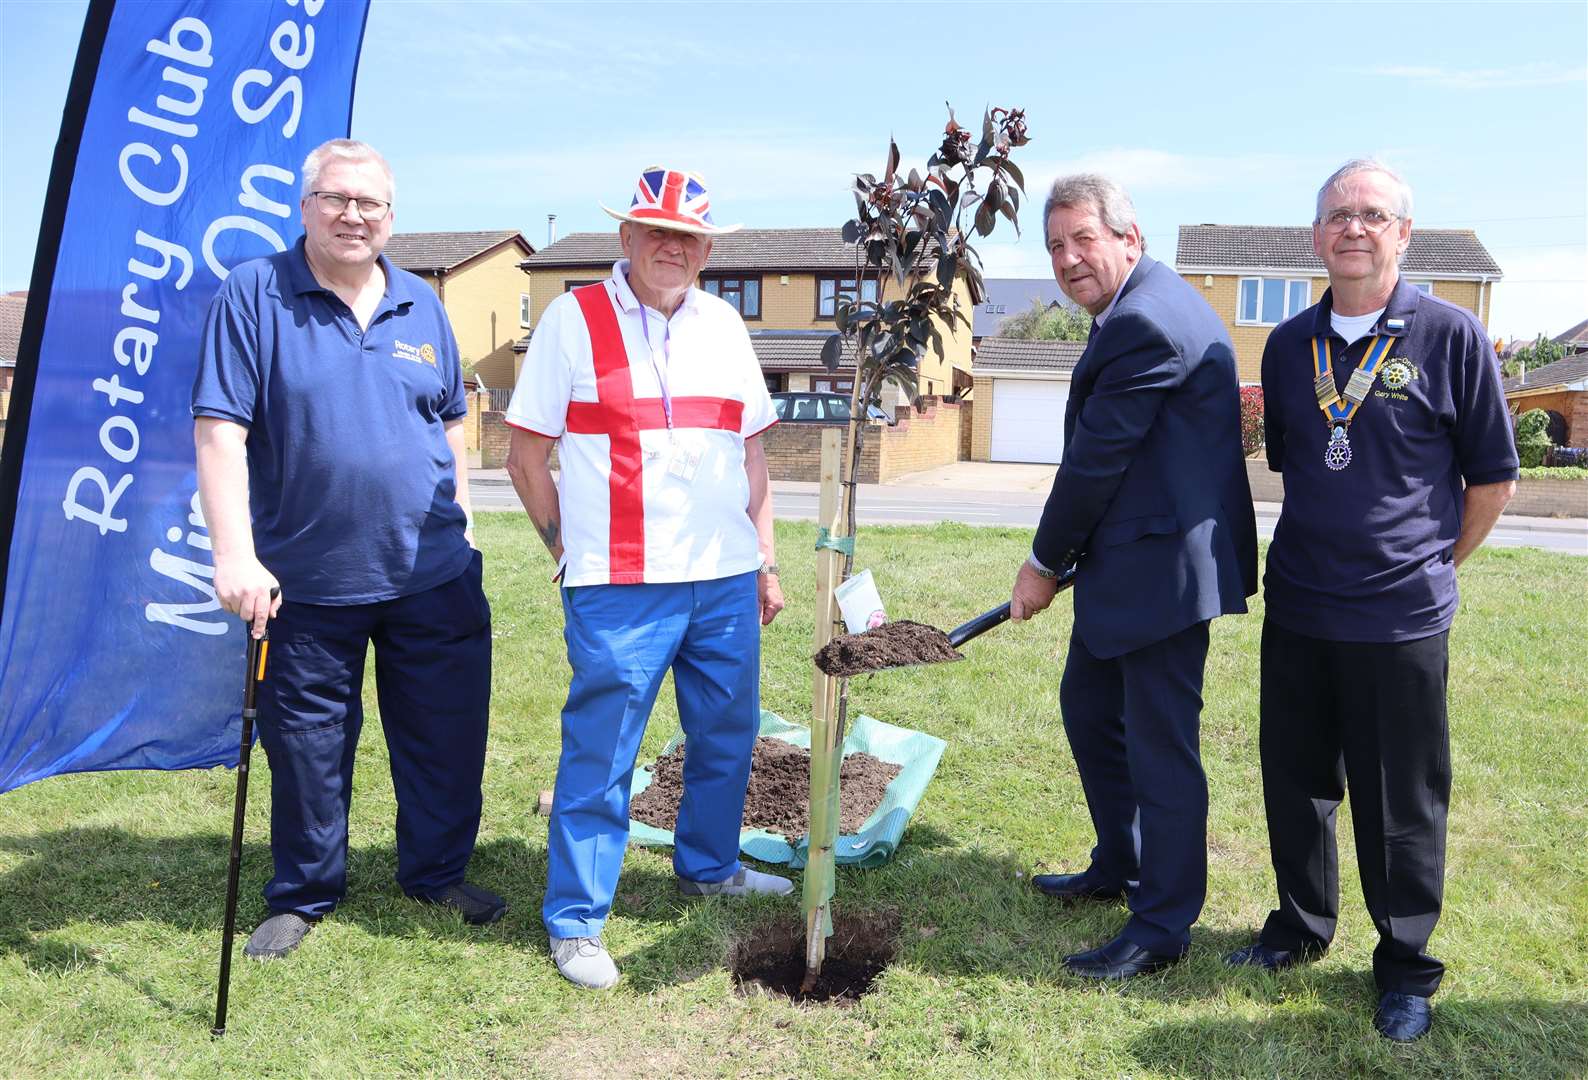 Sittingbourne and Sheppey MP Gordon Henderson helps plant a tree for the Queen's Green Canopy Platinum Jubilee initiative outside the Abbey Hotel, The Broadway, Minster, with Minster-on-Sea Rotary Club members, from the left, Simon Mulchinock, Colin Obee and president Gary White